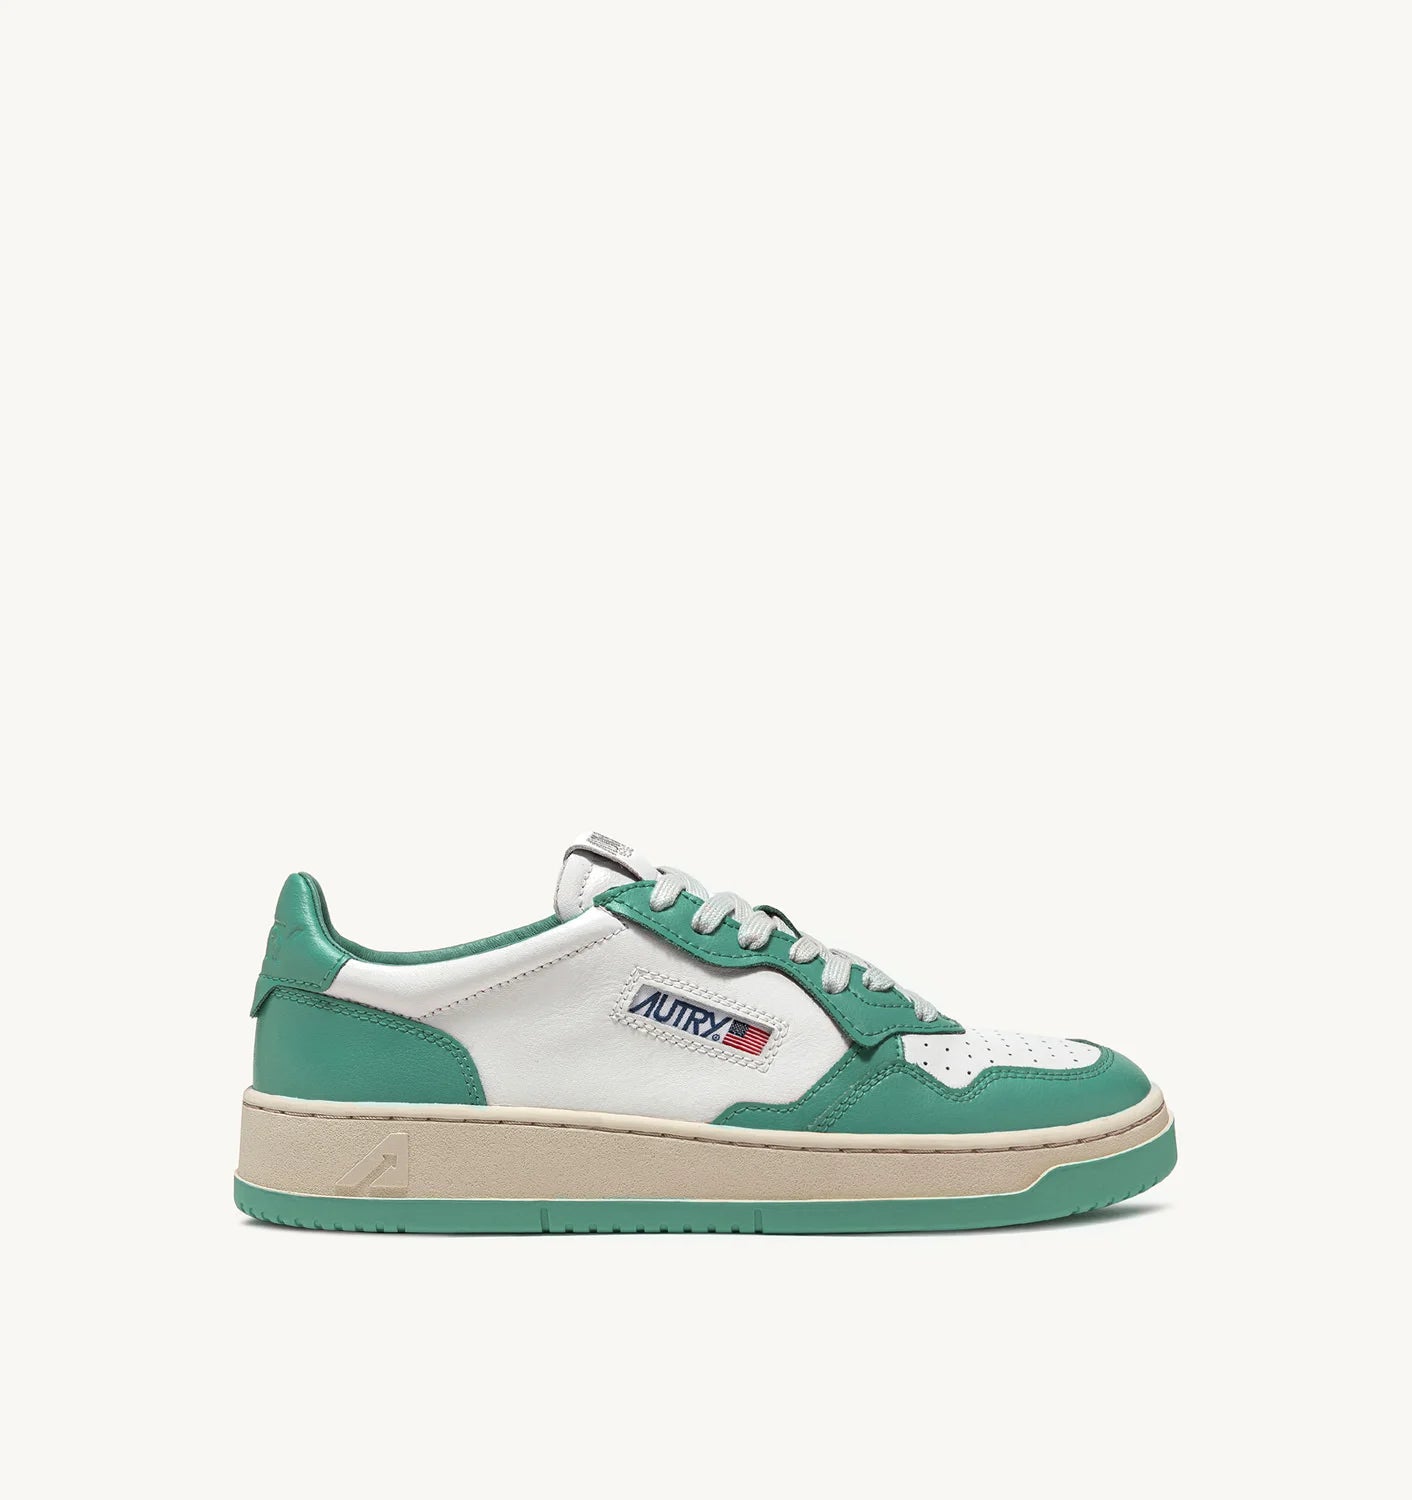 Autry Sneakers Donna Medalist AULW-WB30 White/Green